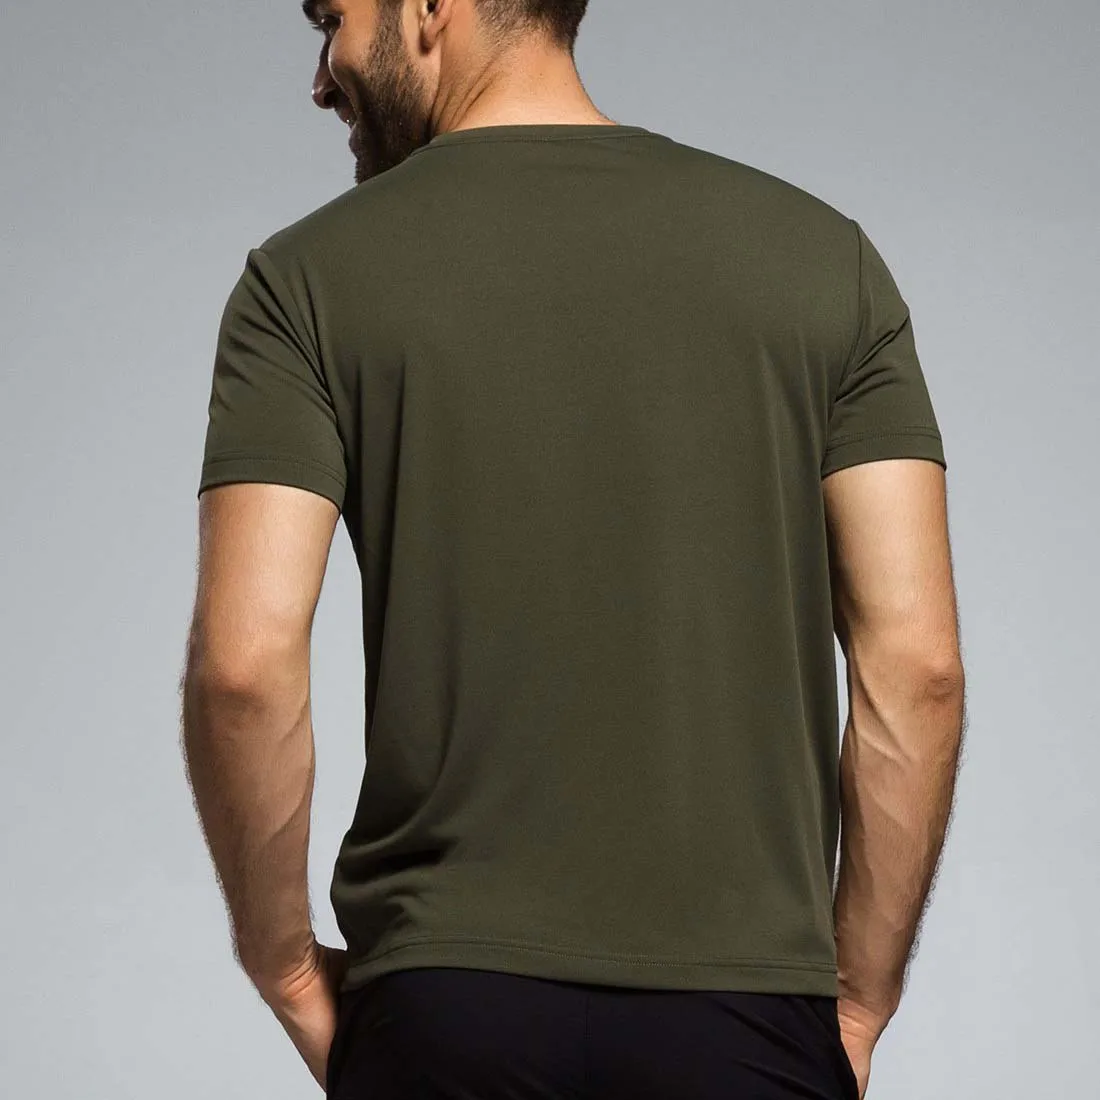 2018 New Products 95 Cotton 5 Spandex Men's Fitness Plain T-shirts In ...